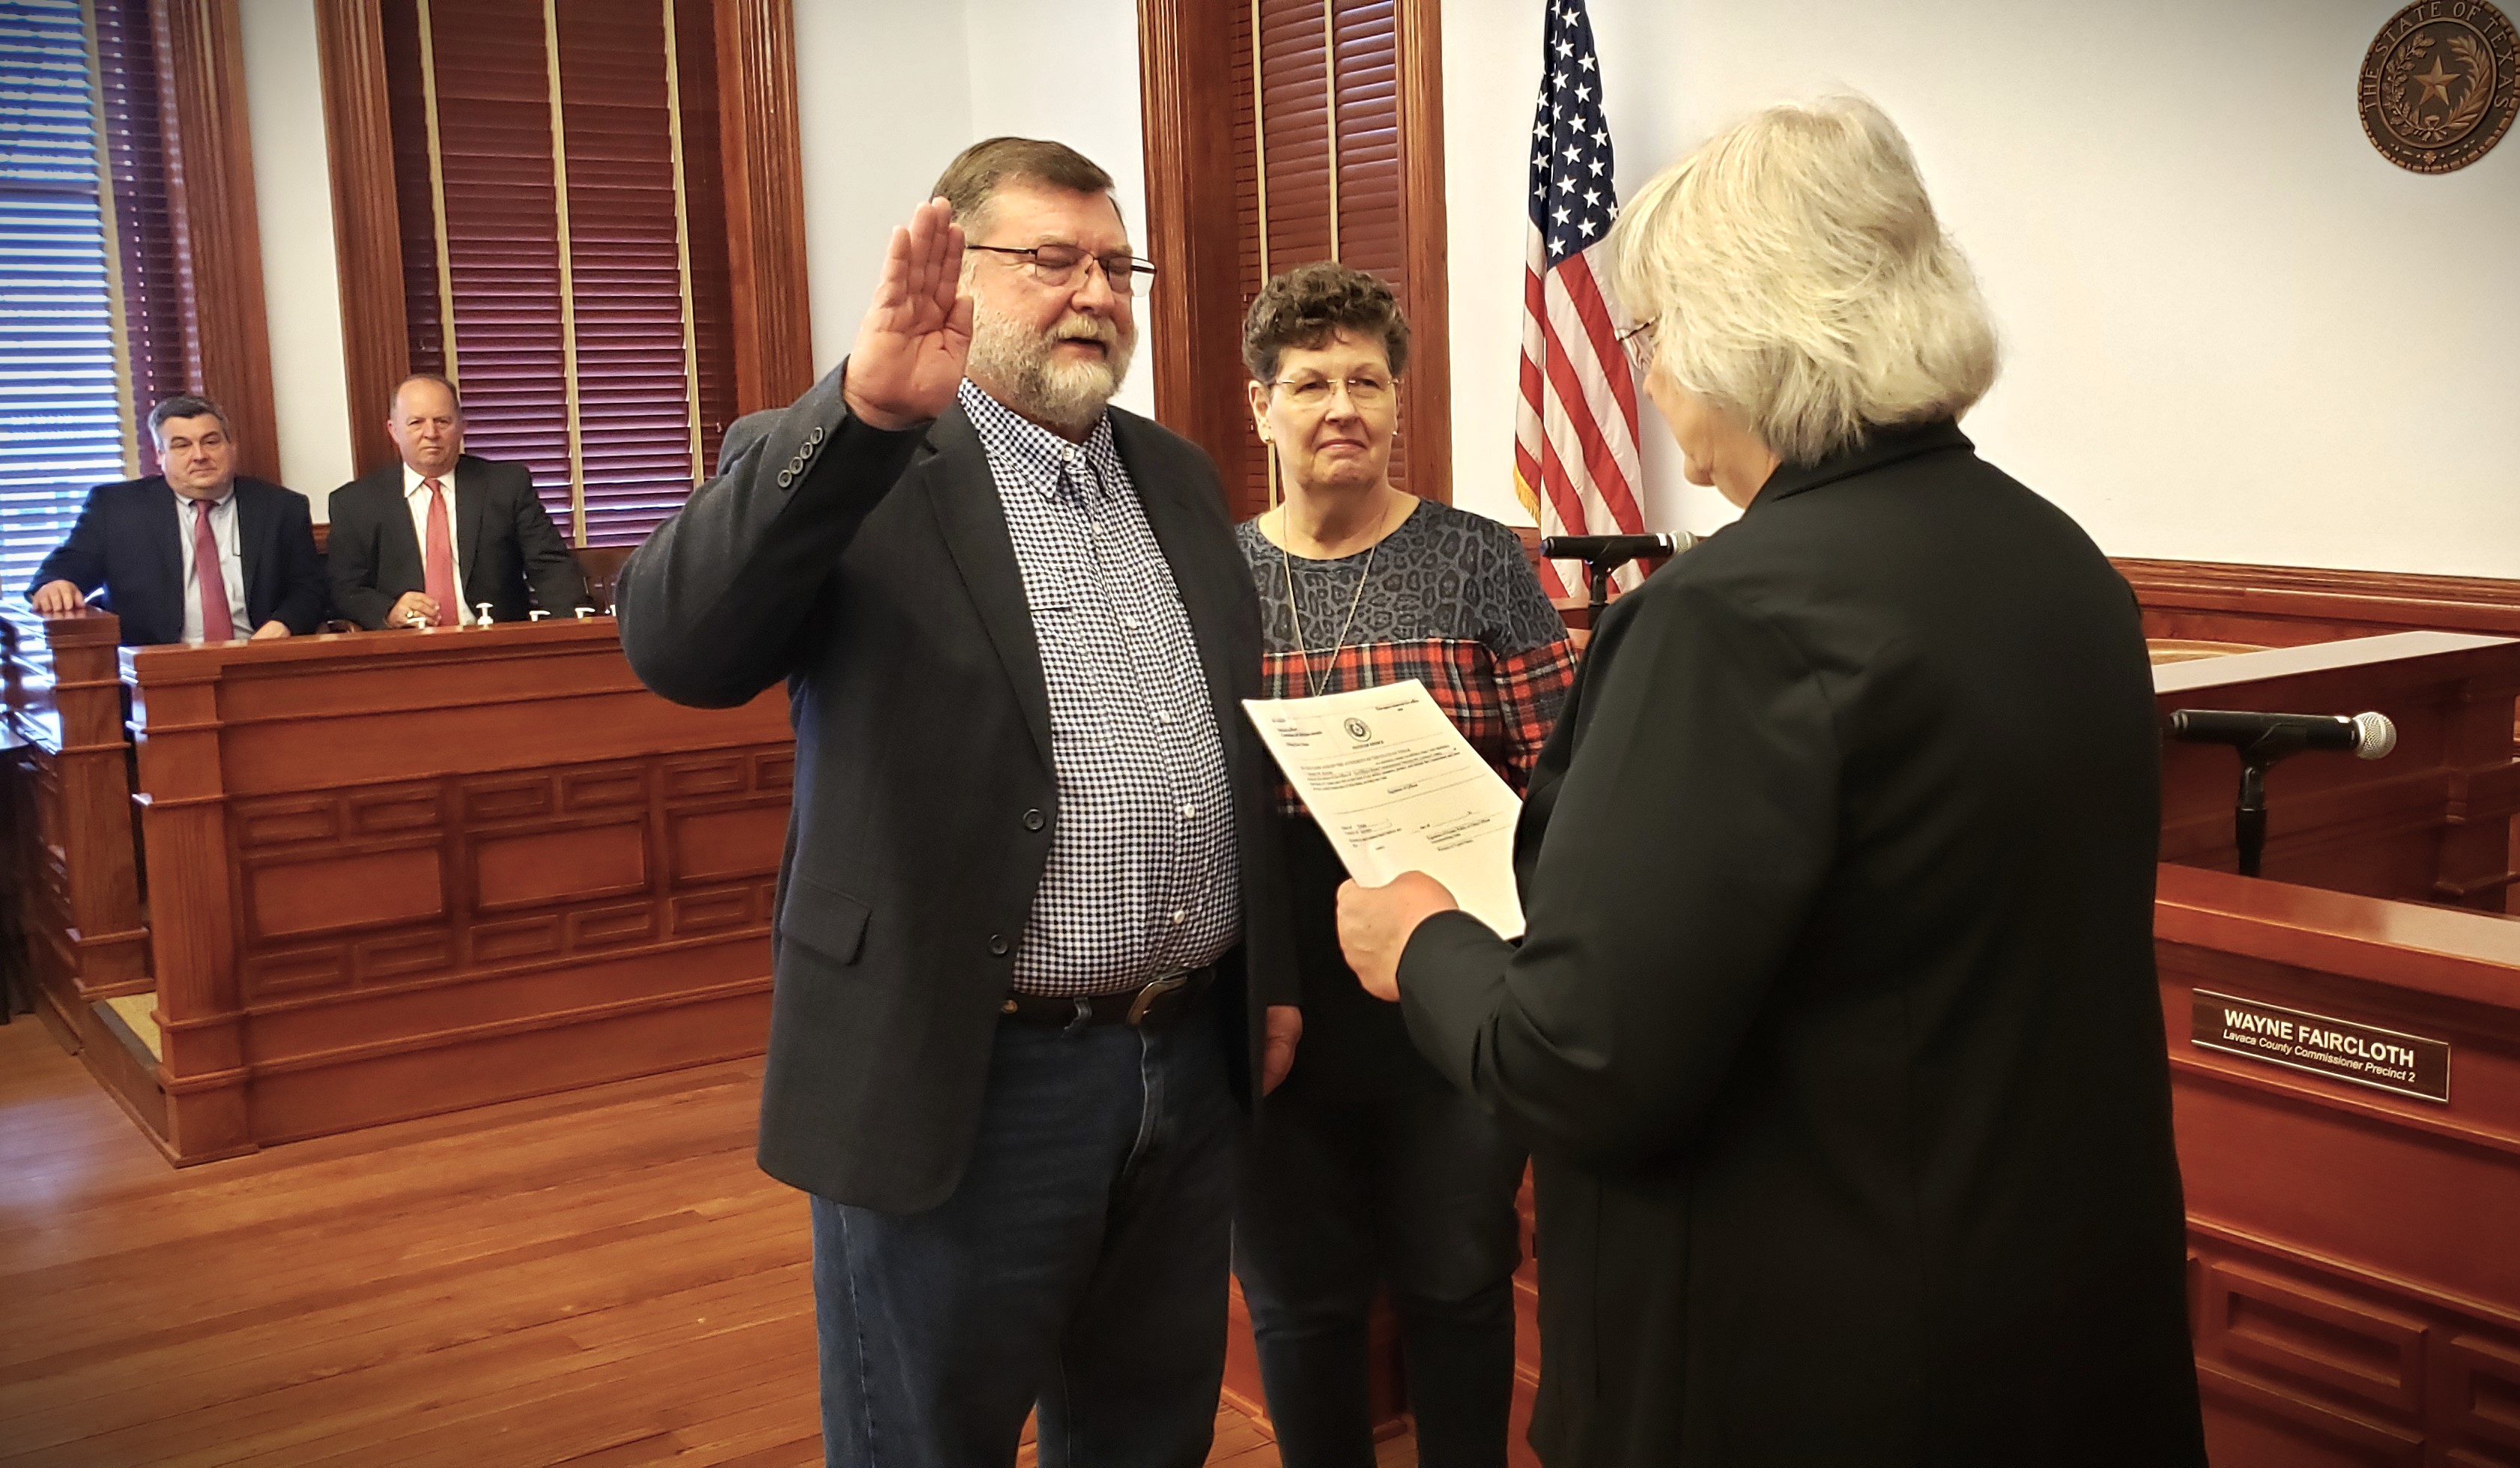 Dennis Kocian takes his oath office wife his bride Shirley at his side.